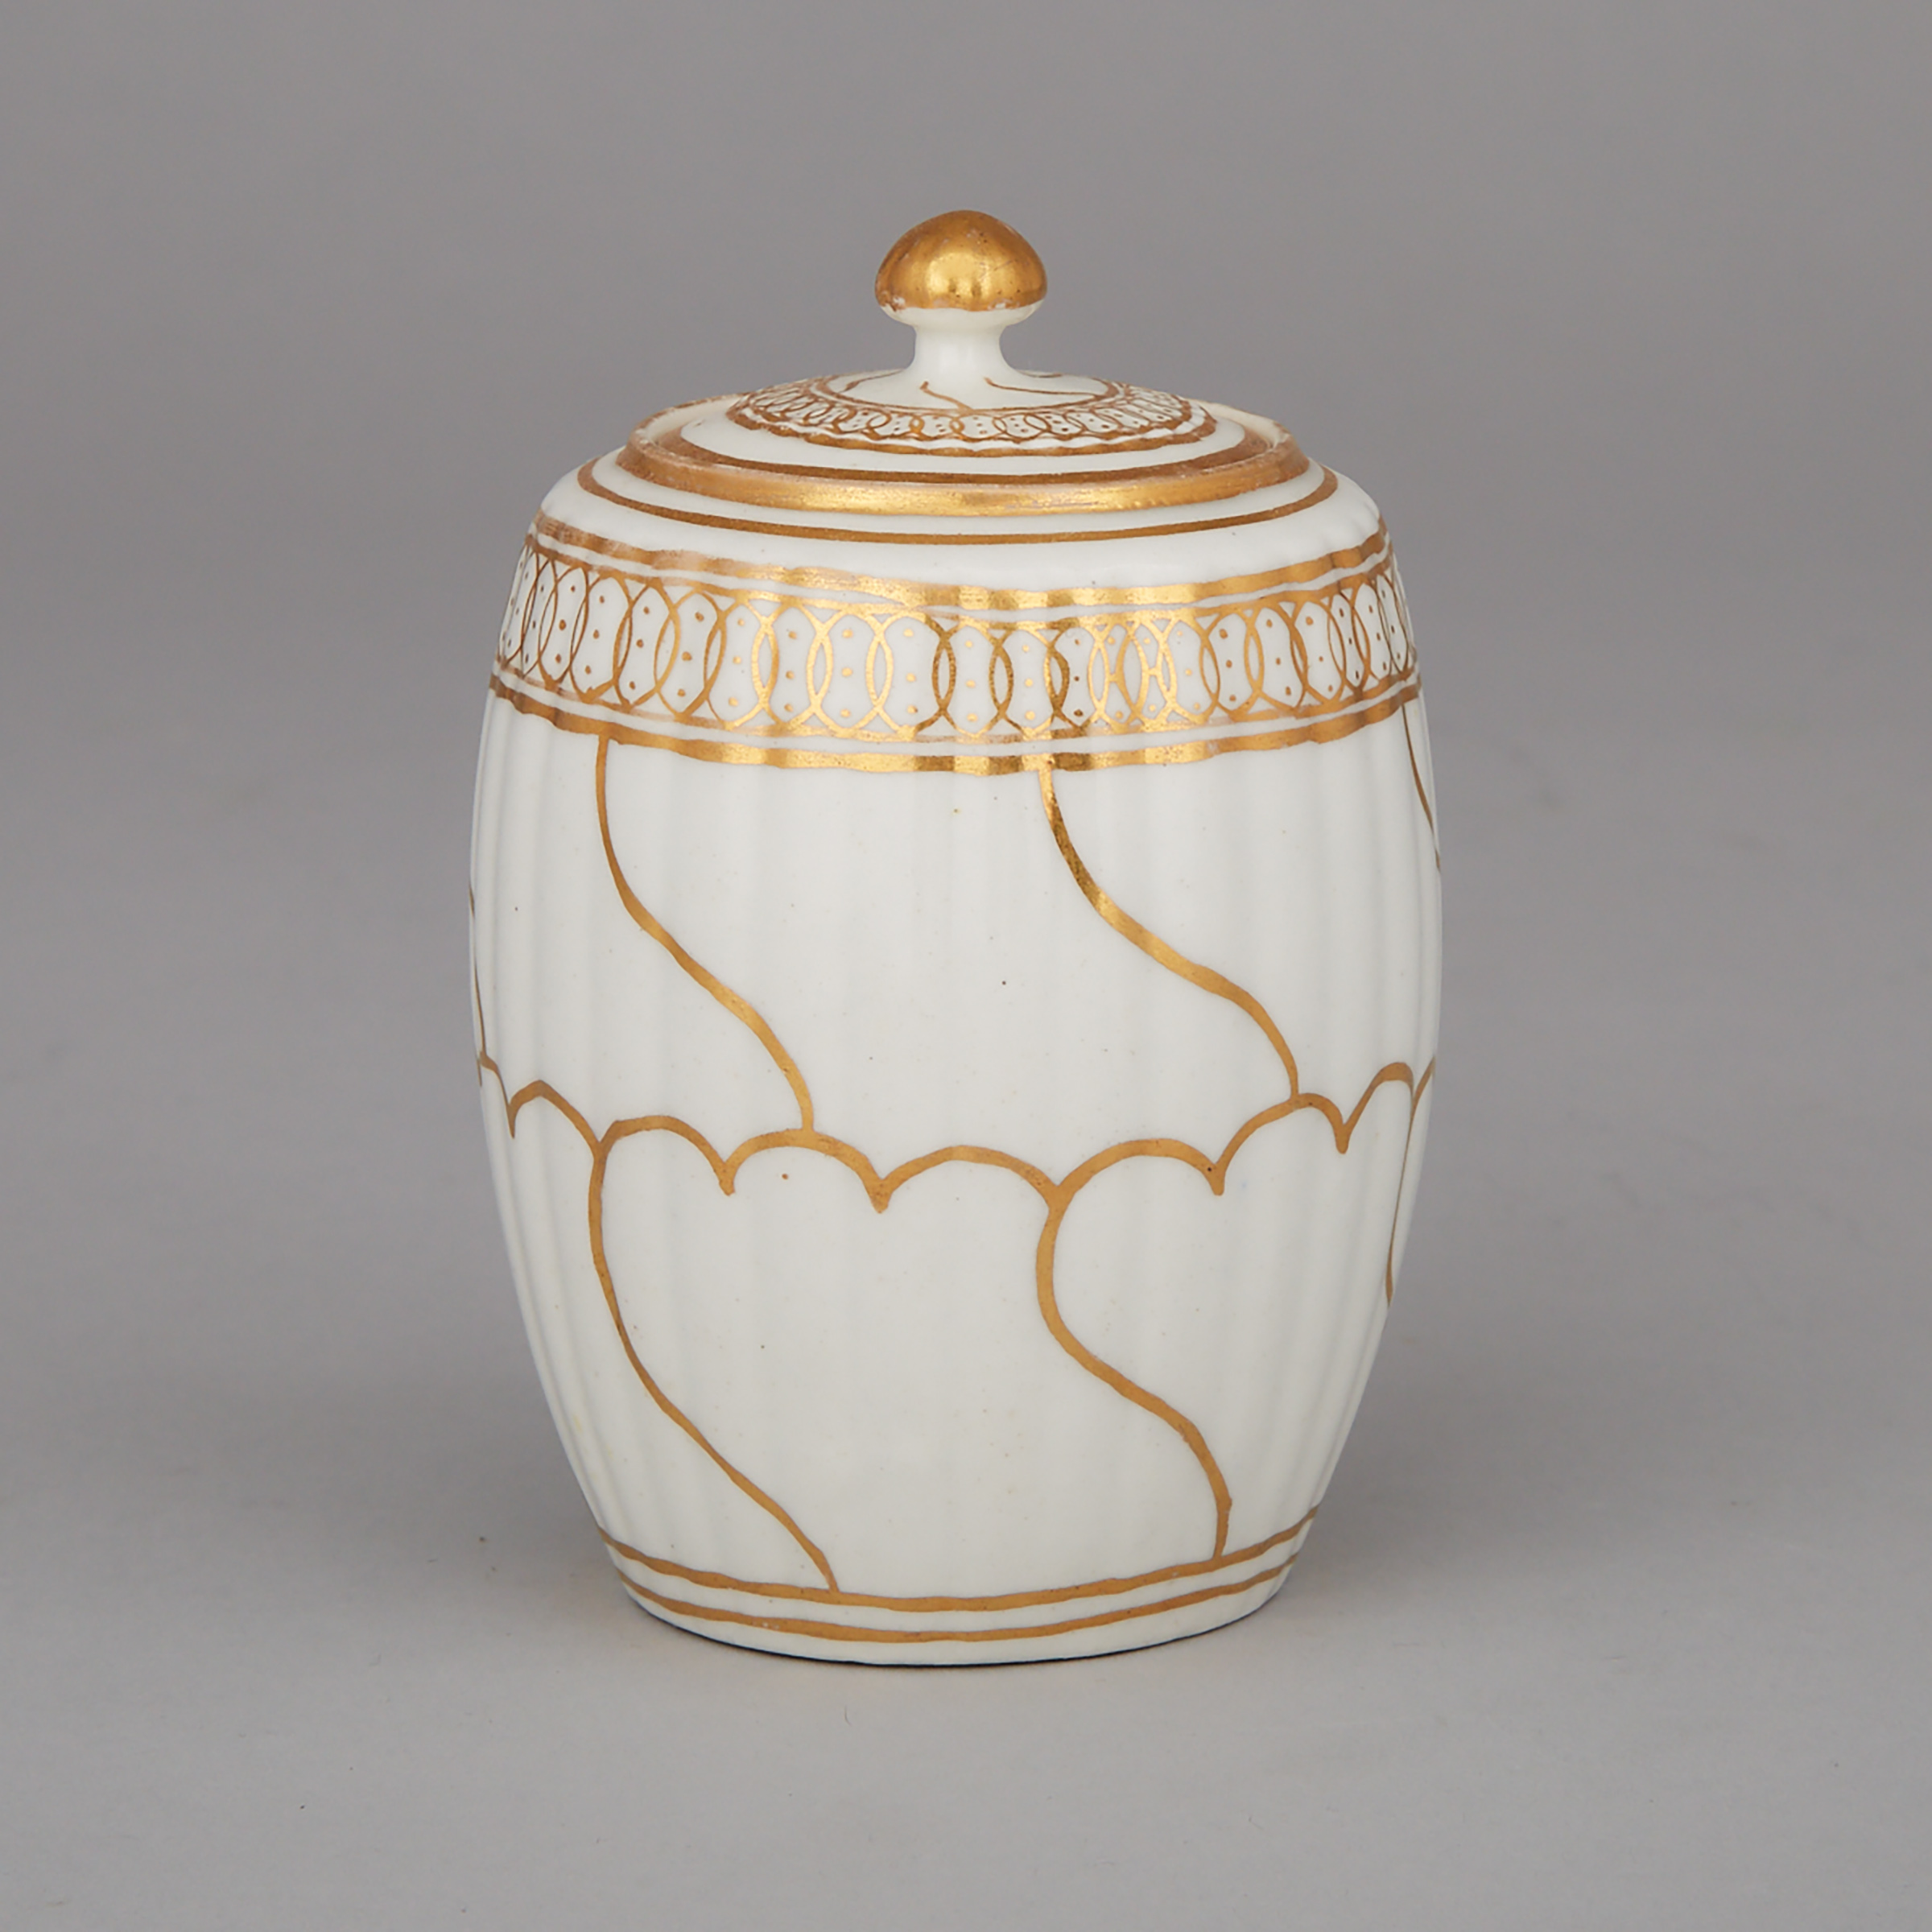 Caughley ‘Queens Gilt’ Pattern Tea Canister, c.1790